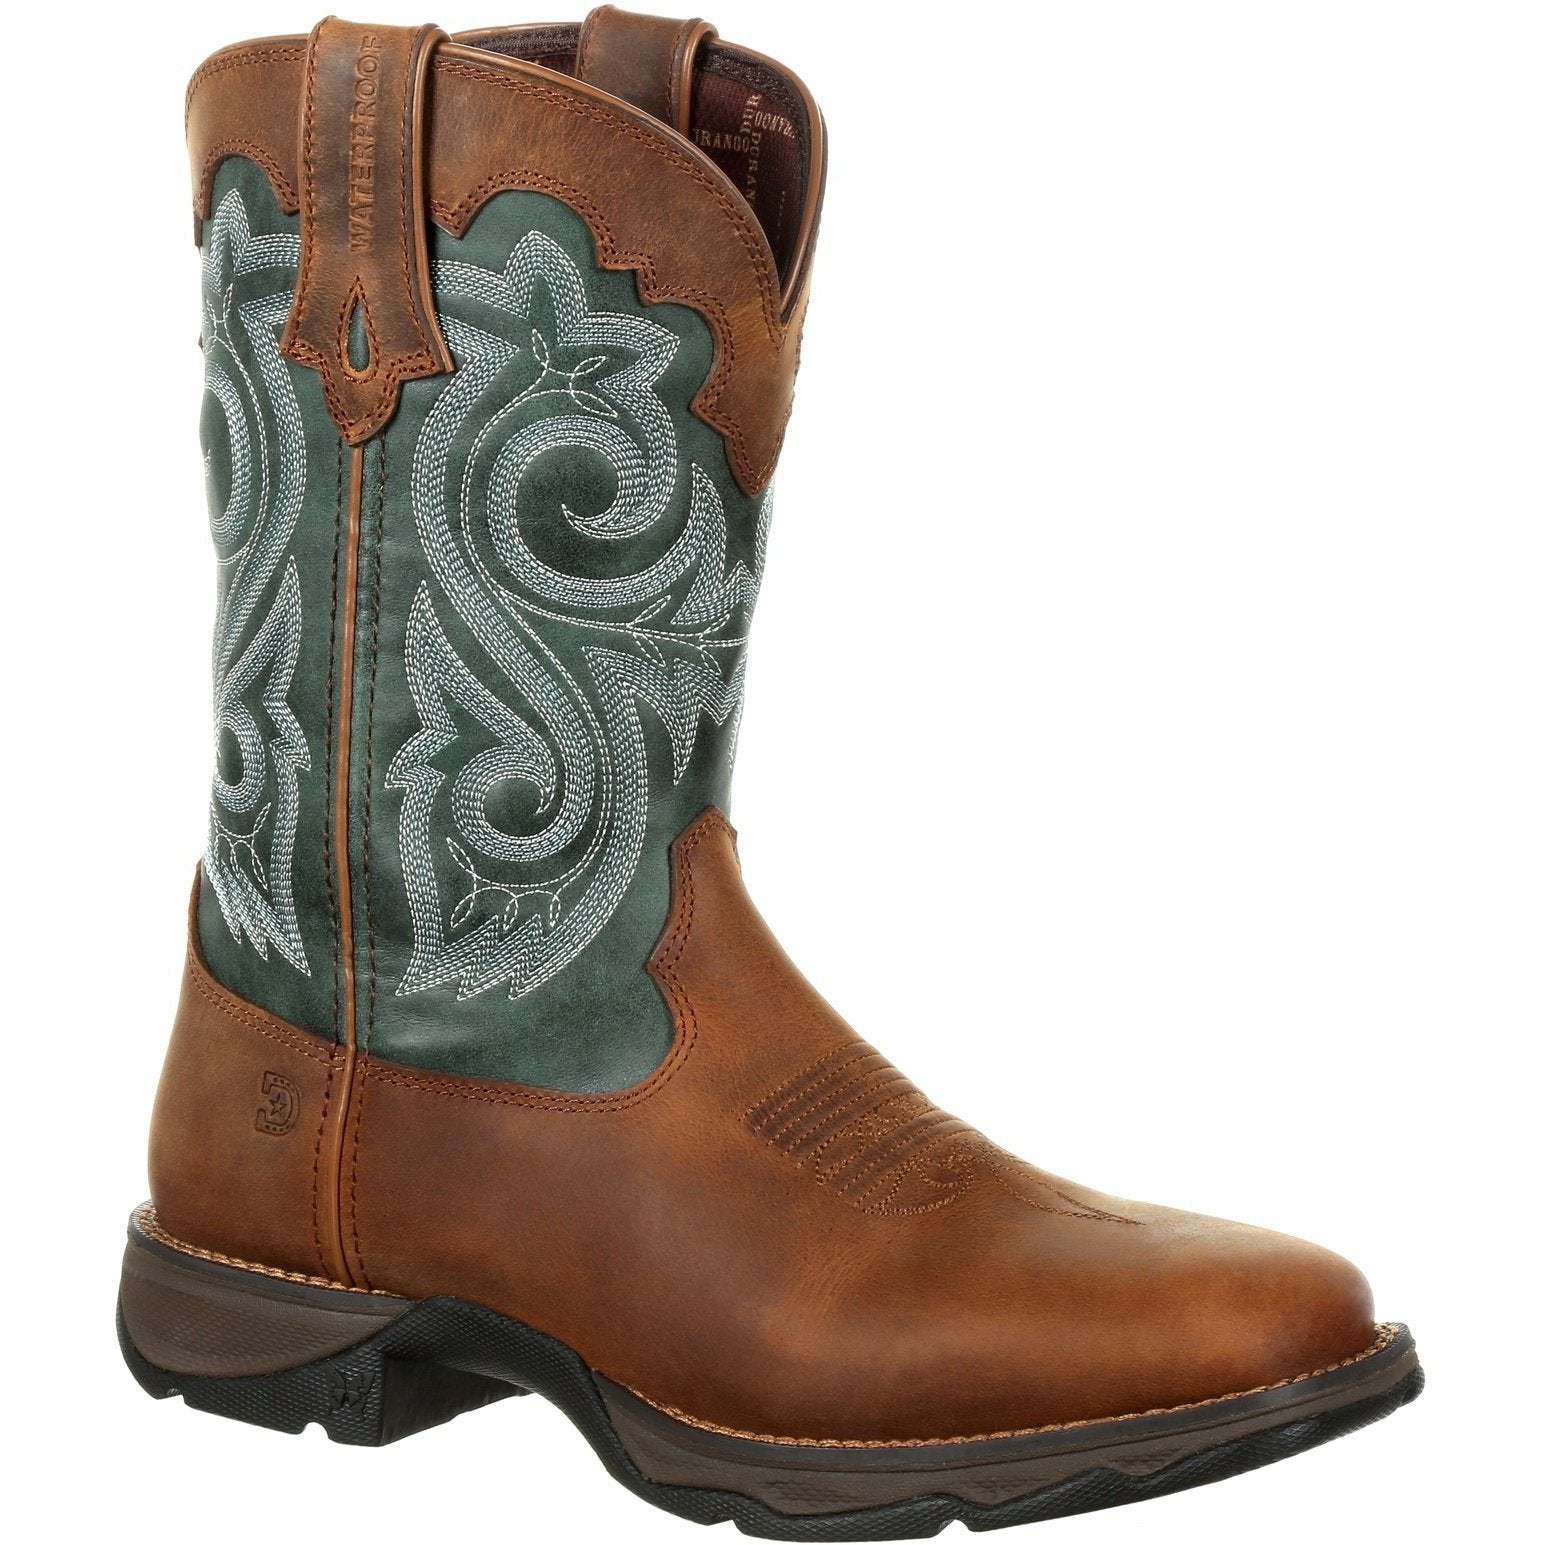 Durango Women's Lady Rebel 10" Square Toe WP Western Boot - DRD0312 6 / Medium / Brown - Overlook Boots